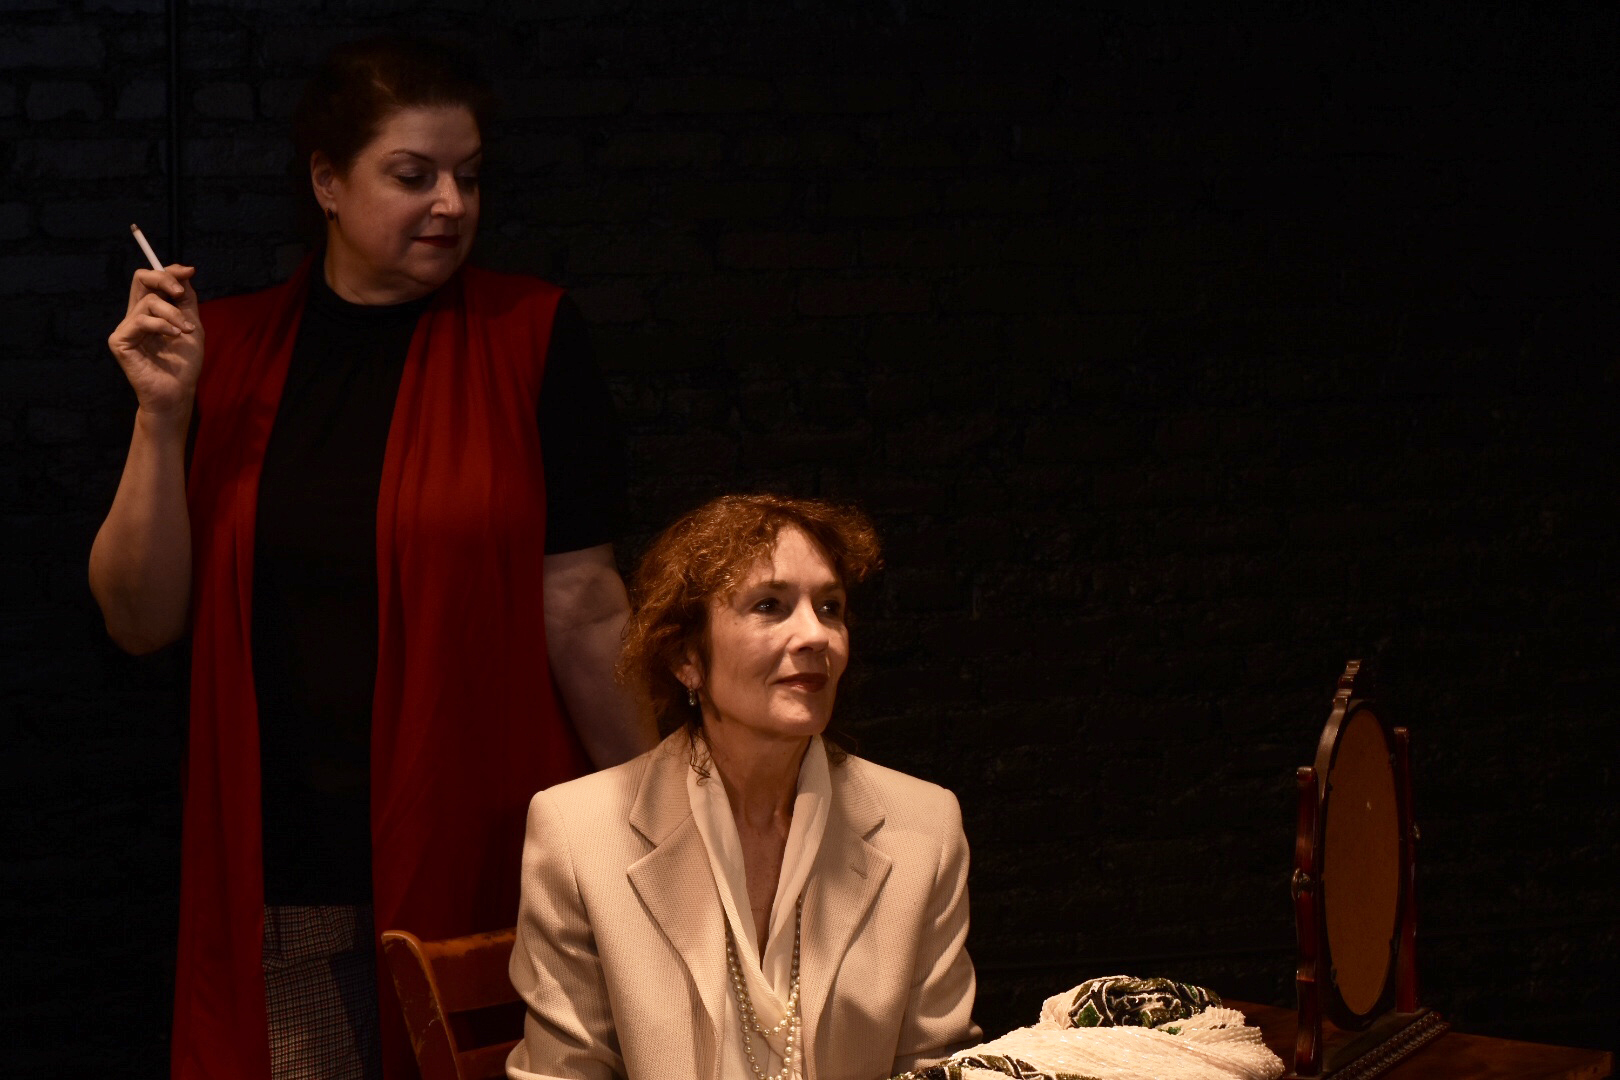 Lee Rush and Becky Minard as Sally and Clarissa in MRS. DALLOWAY by Virginia Woolf, adapted by Hal Coase